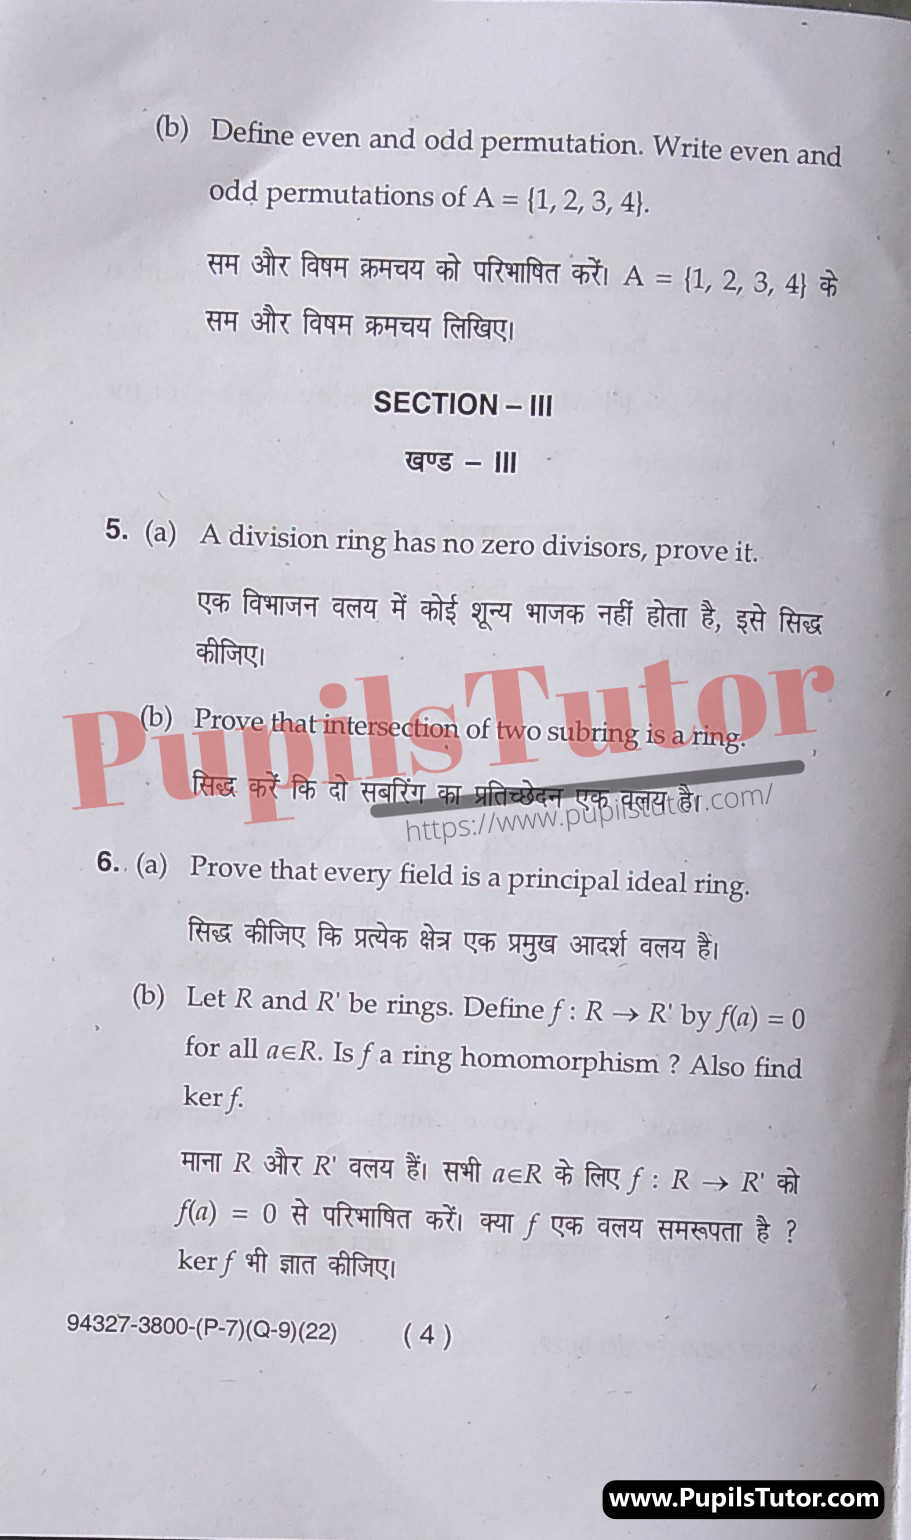 MDU (Maharshi Dayanand University, Rohtak Haryana) Pass Course (B.A. – Bachelor of Arts) Groups And Rings Math Important Questions Of February, 2022 Exam PDF Download Free (Page 4)